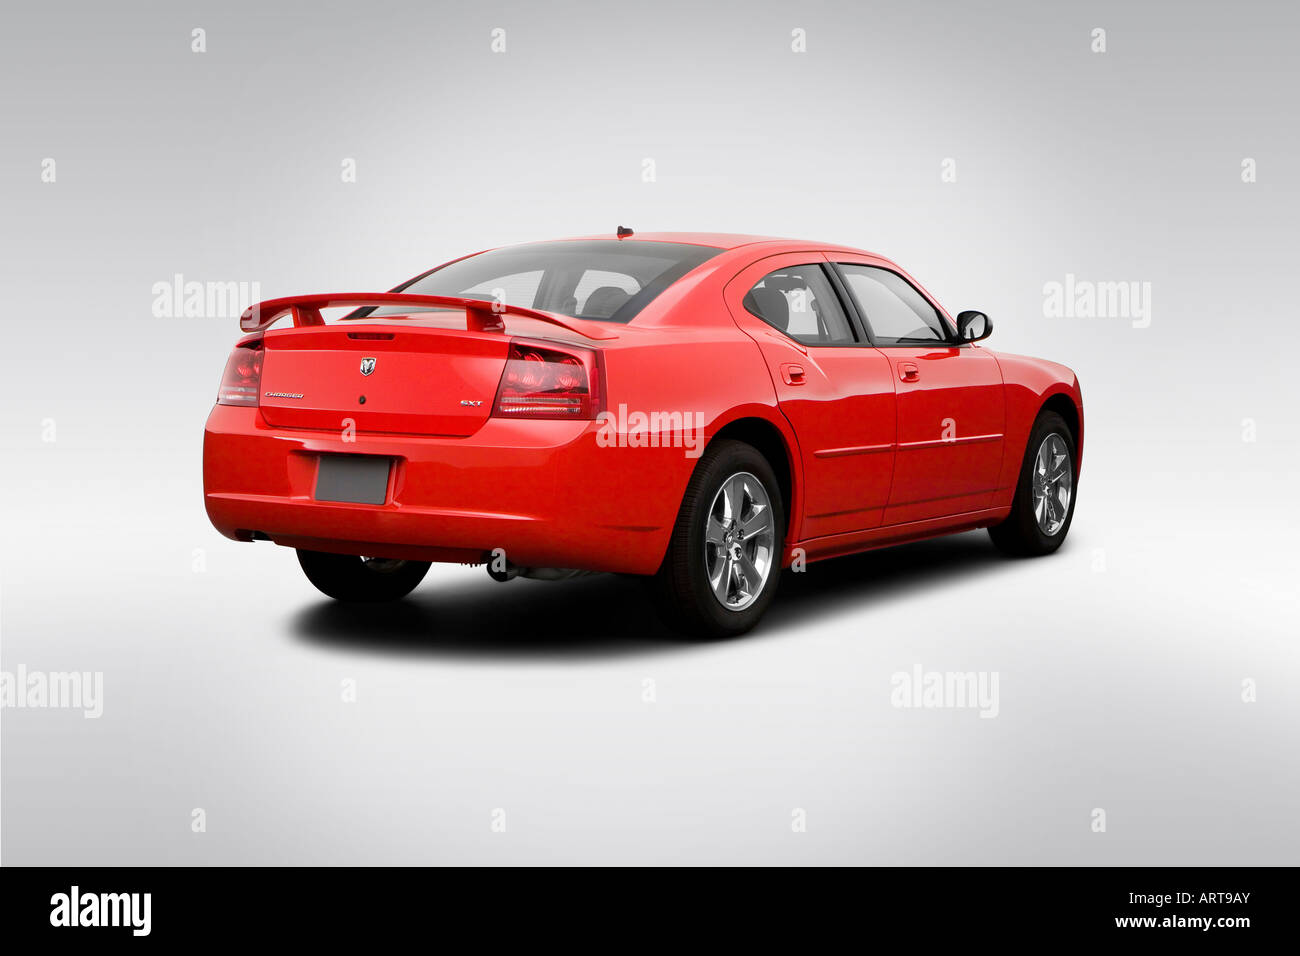 2008 Dodge Charger SXT in Red - Rear angle view Stock Photo - Alamy